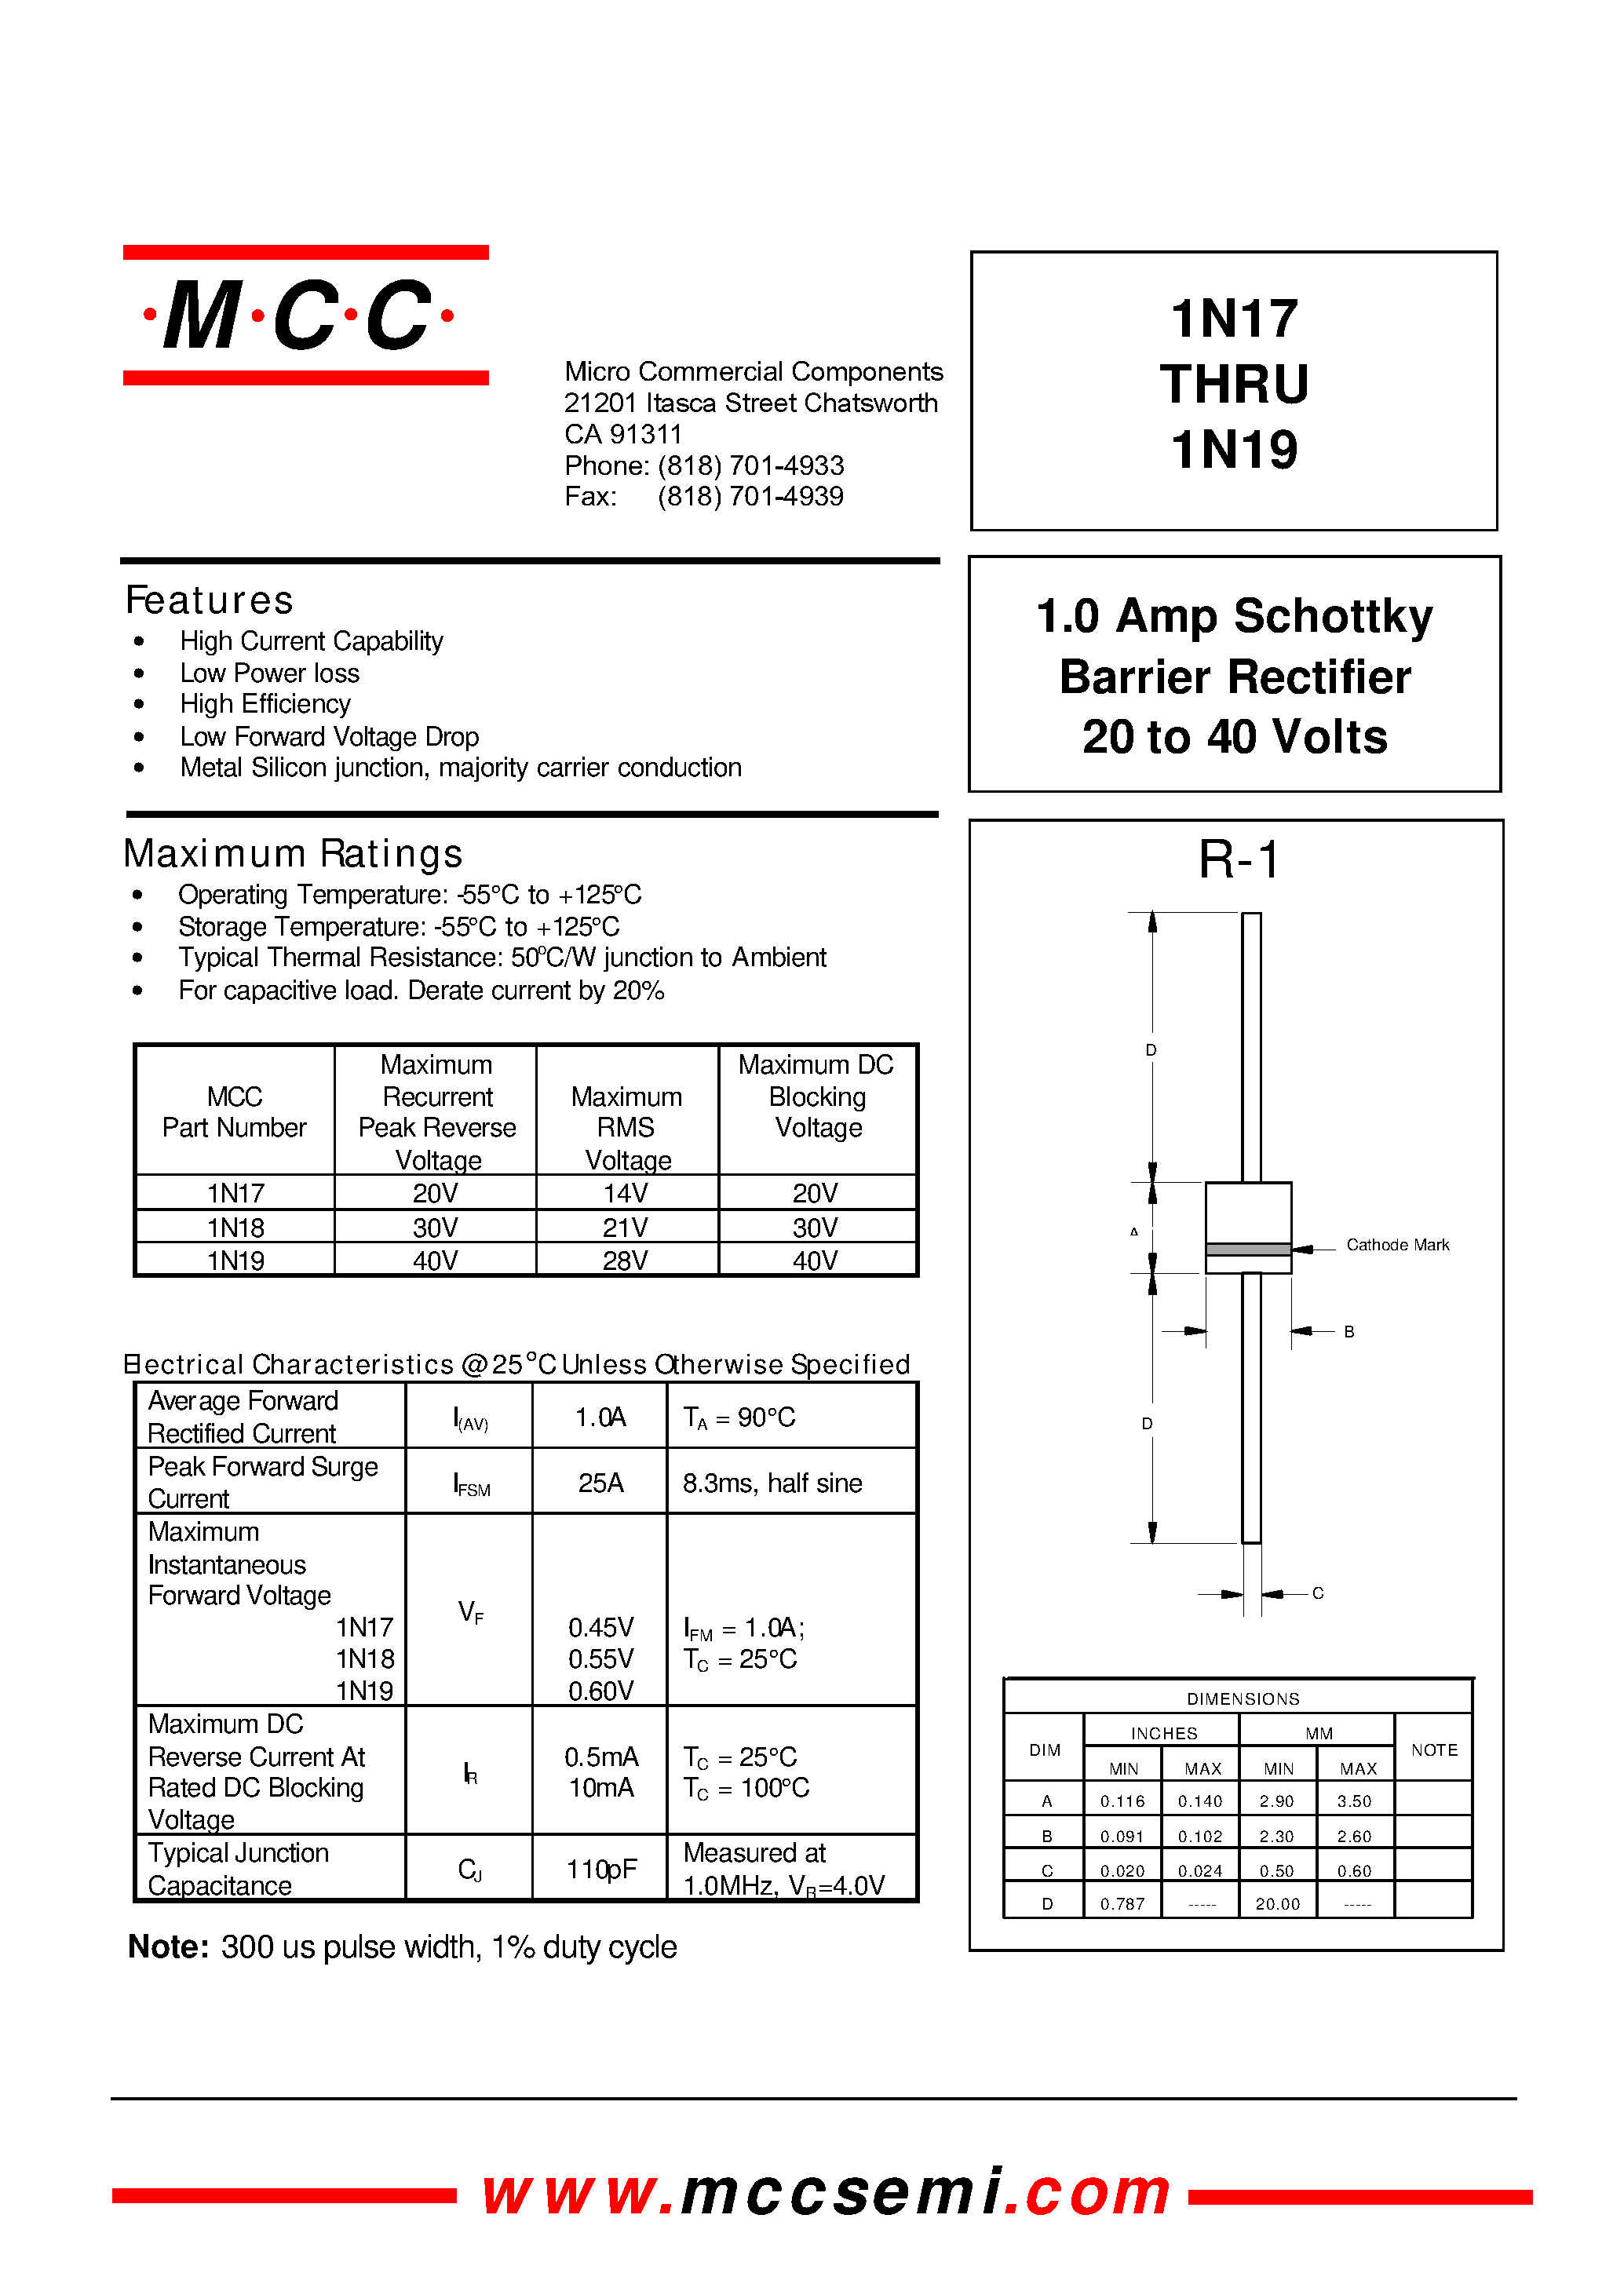 Datasheet 1N19 - 1.0 Amp Schottky Barrier Rectifier 20 to 40 Volts page 1